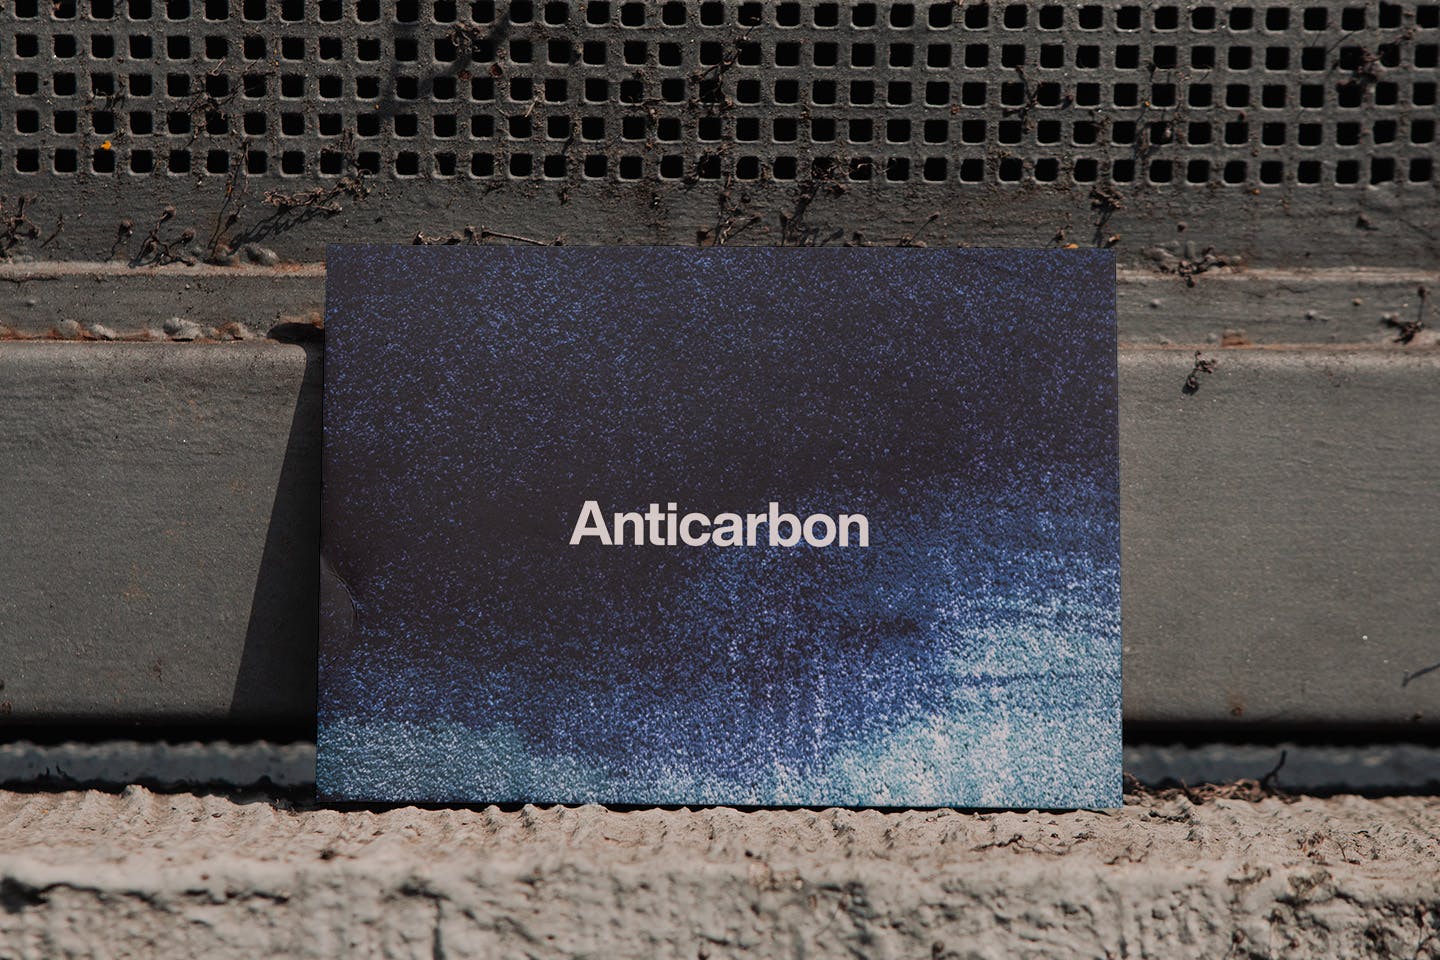 Brand for venture capital firm Anticarbon, displayed on card